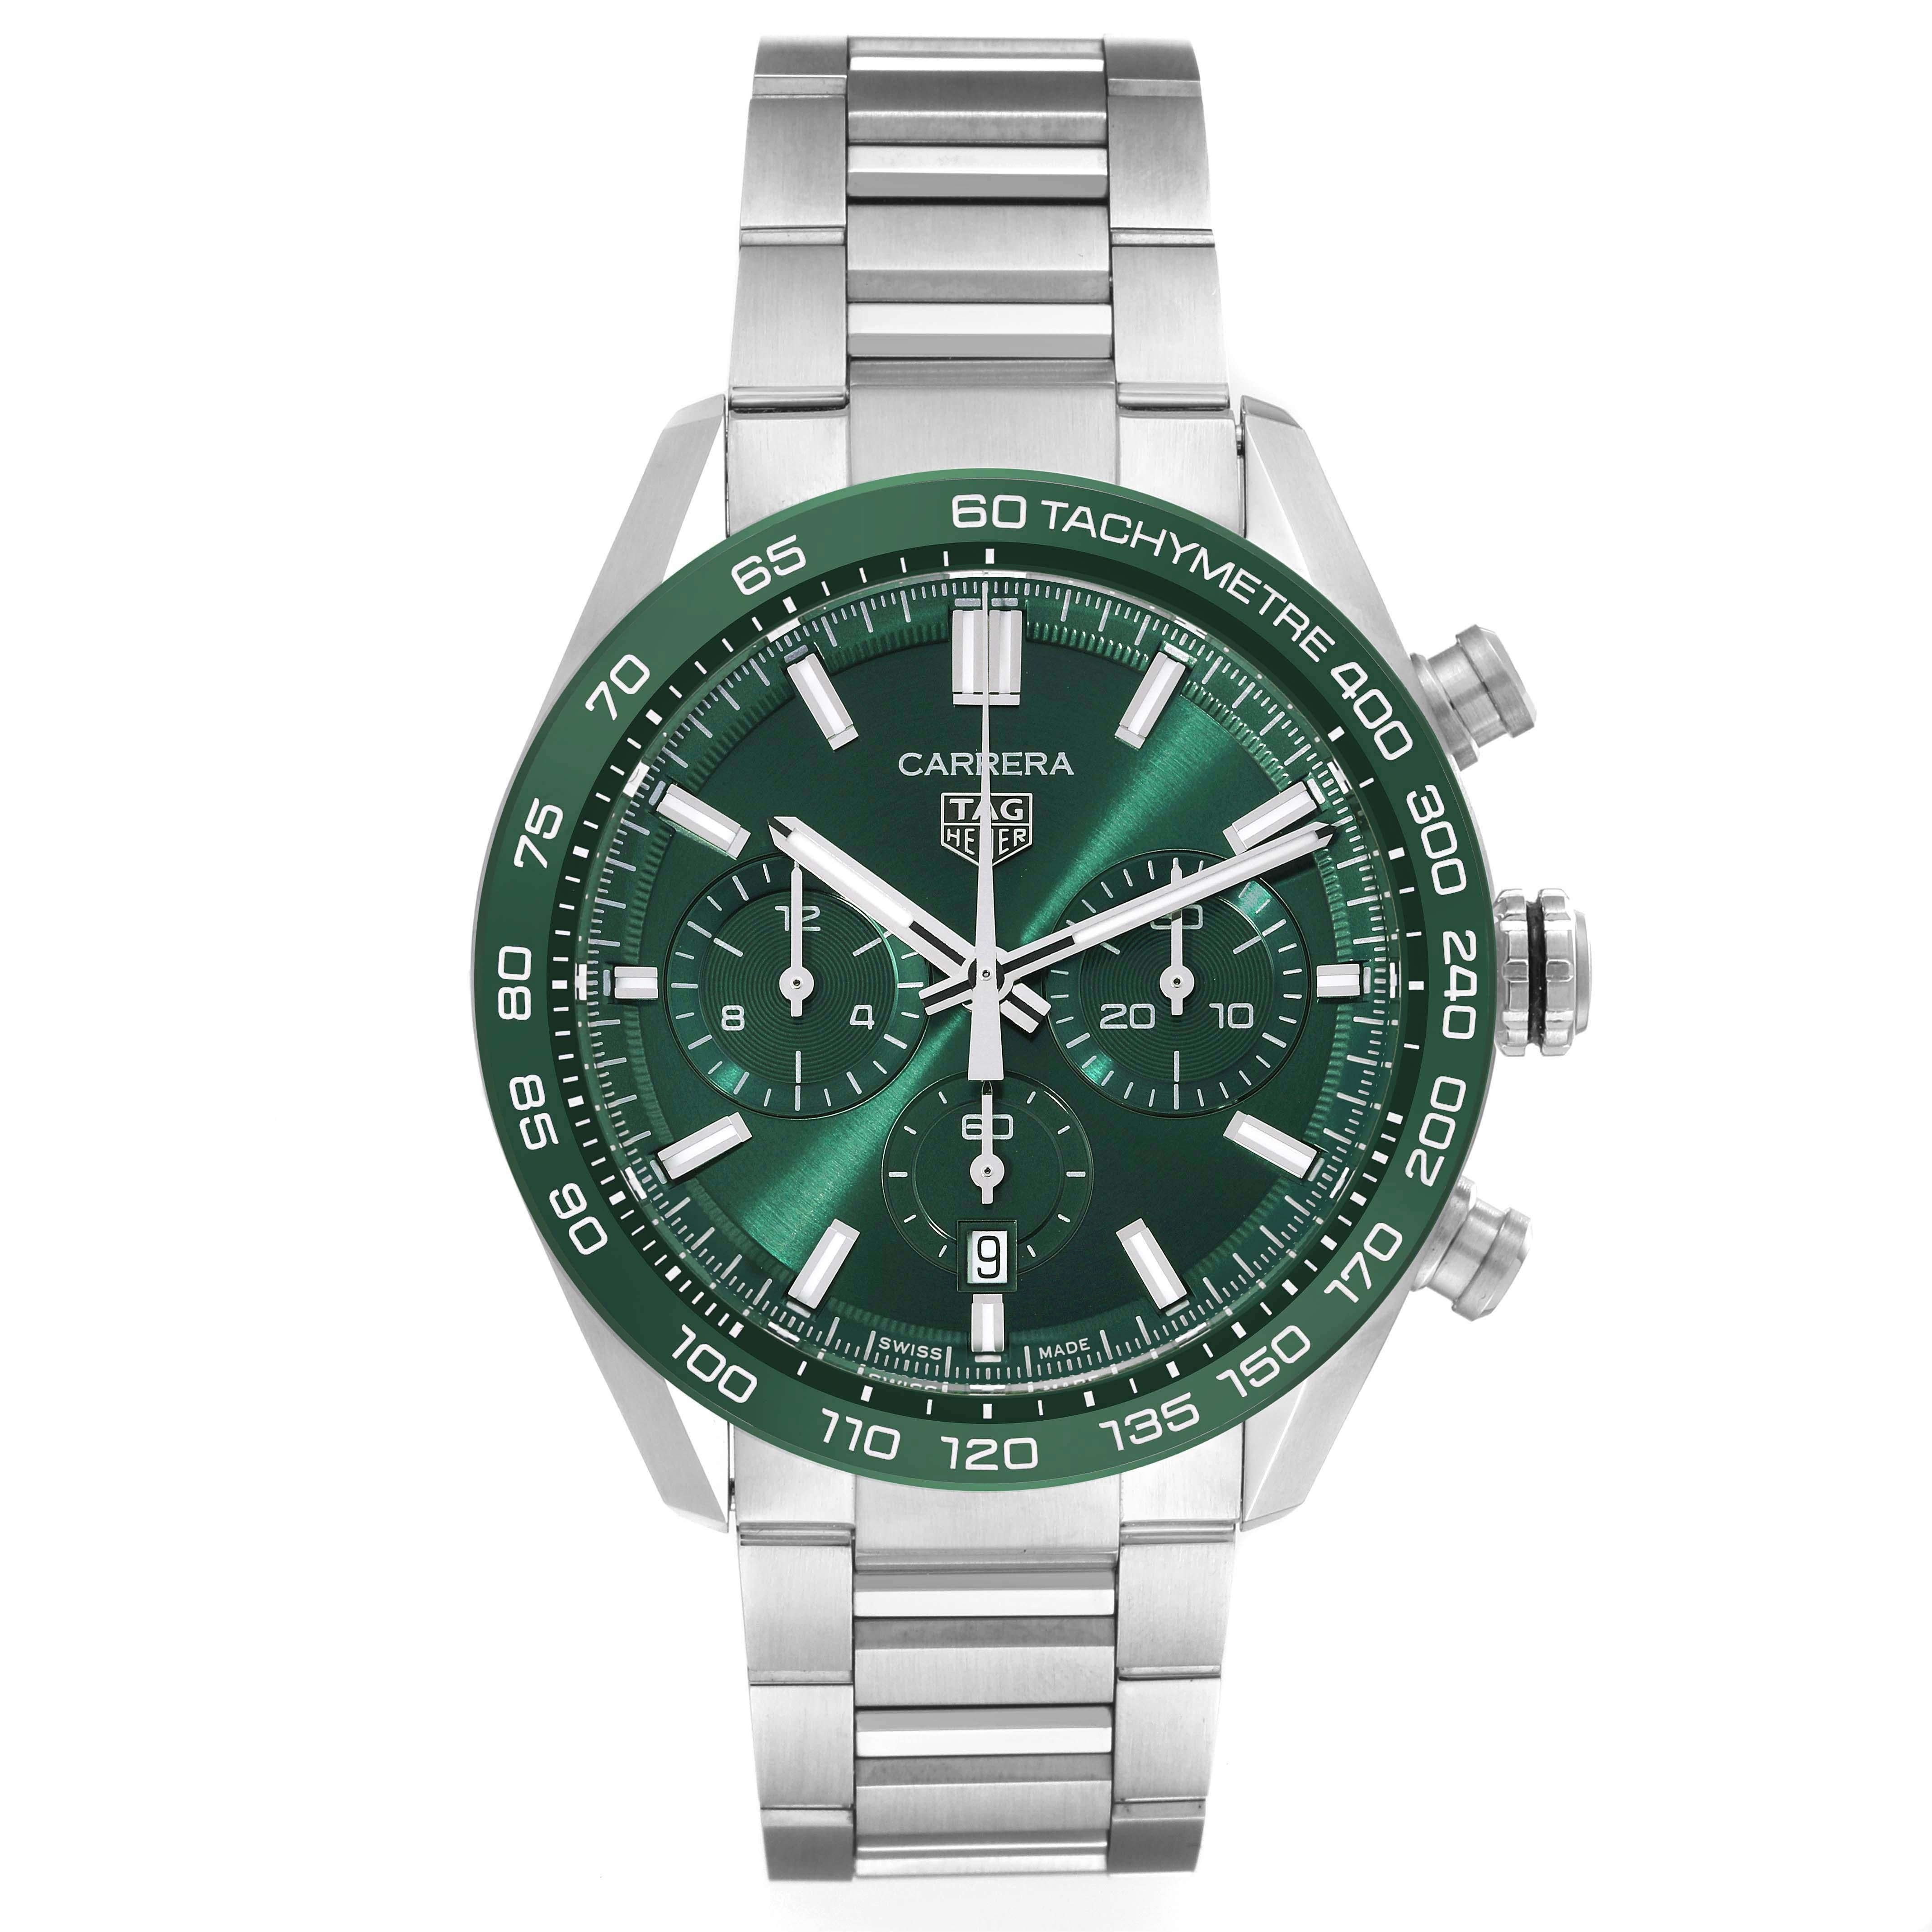 Tag Heuer Carrera Chronograph Green Dial Steel Mens Watch CBN2A1N Unworn. Automatic self-winding chronograph movement. Stainless steel round case 44.0 mm. Transperent sapphire crystal back. Green ceramic tachymeter scale bezel. Scratch resistant